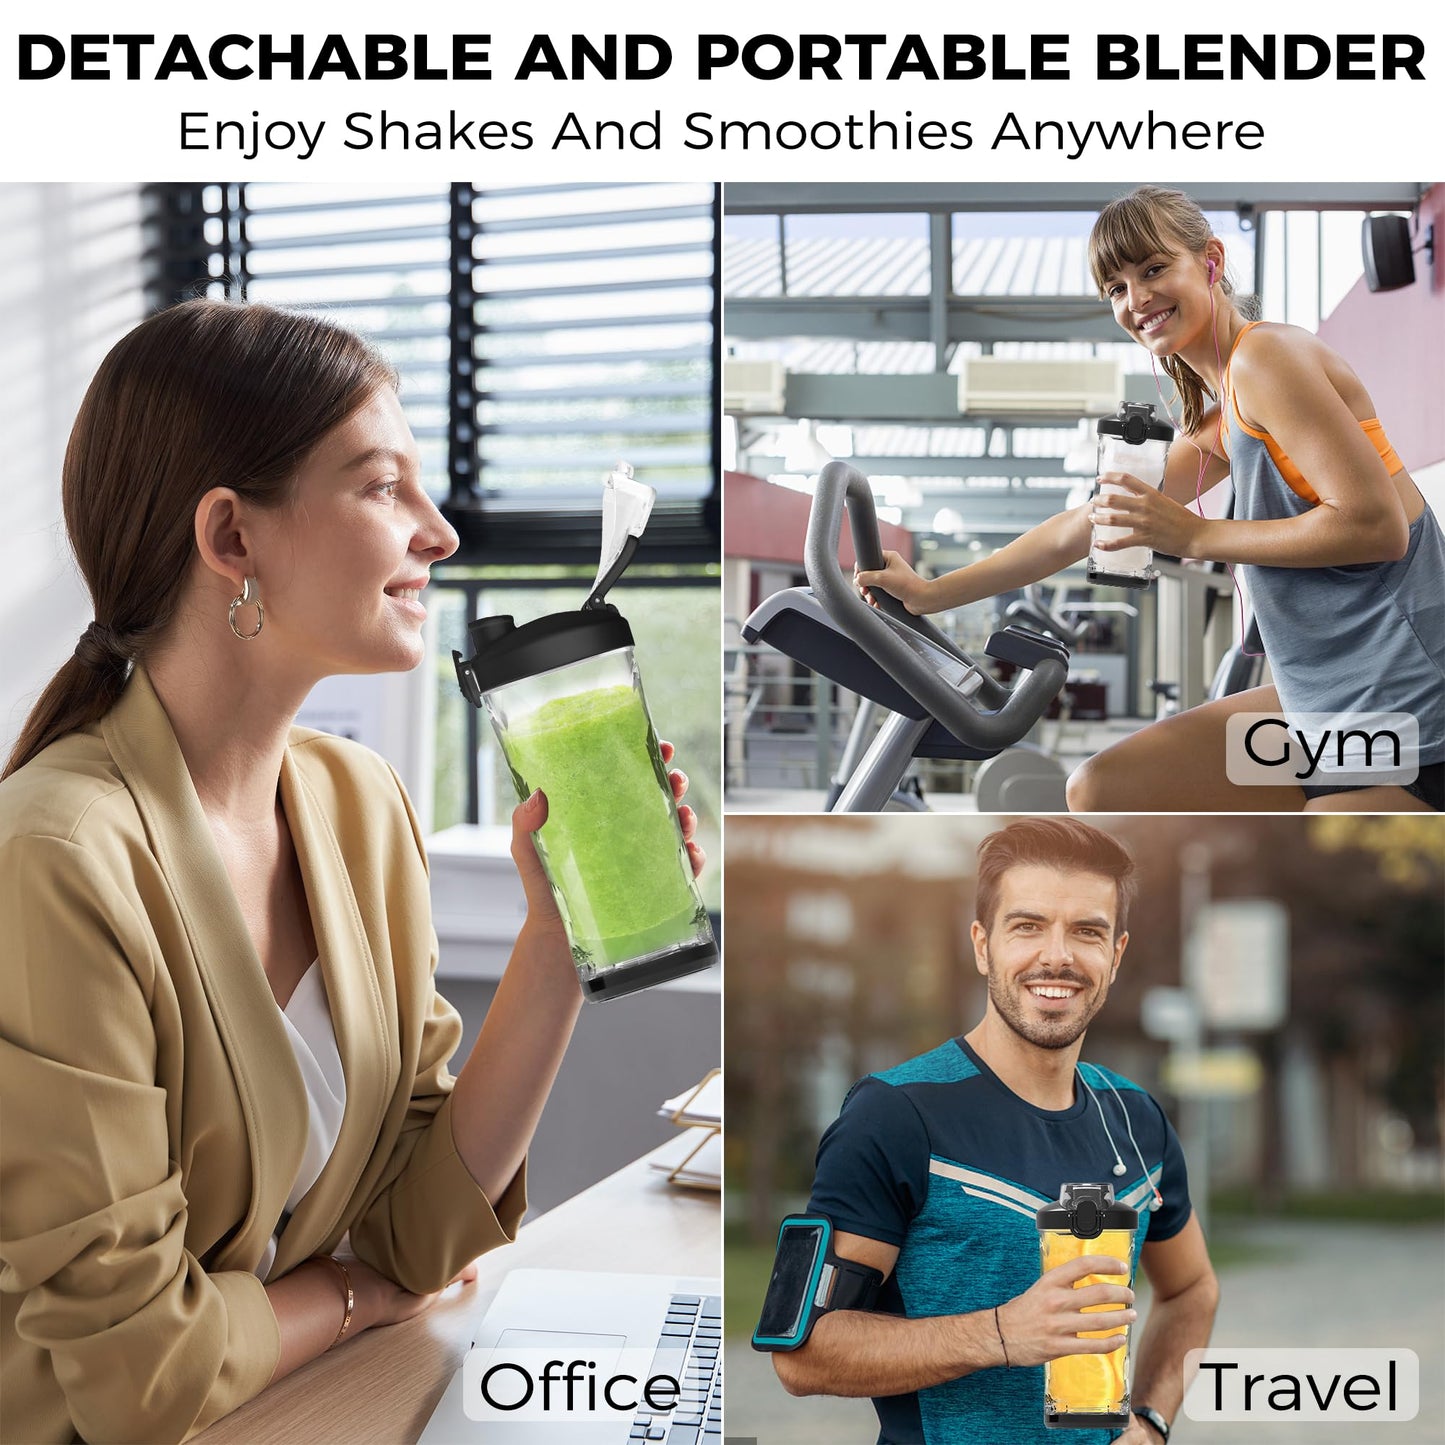 POSOSTO Portable Blender，270W Powerful Blender for Shakes and Smoothies，Personal Size Blender 6 Blades,20 Oz Mini Blender Cup with Travel Lid and USB Rechargeable for Office,Gym,Kitchen（Black）